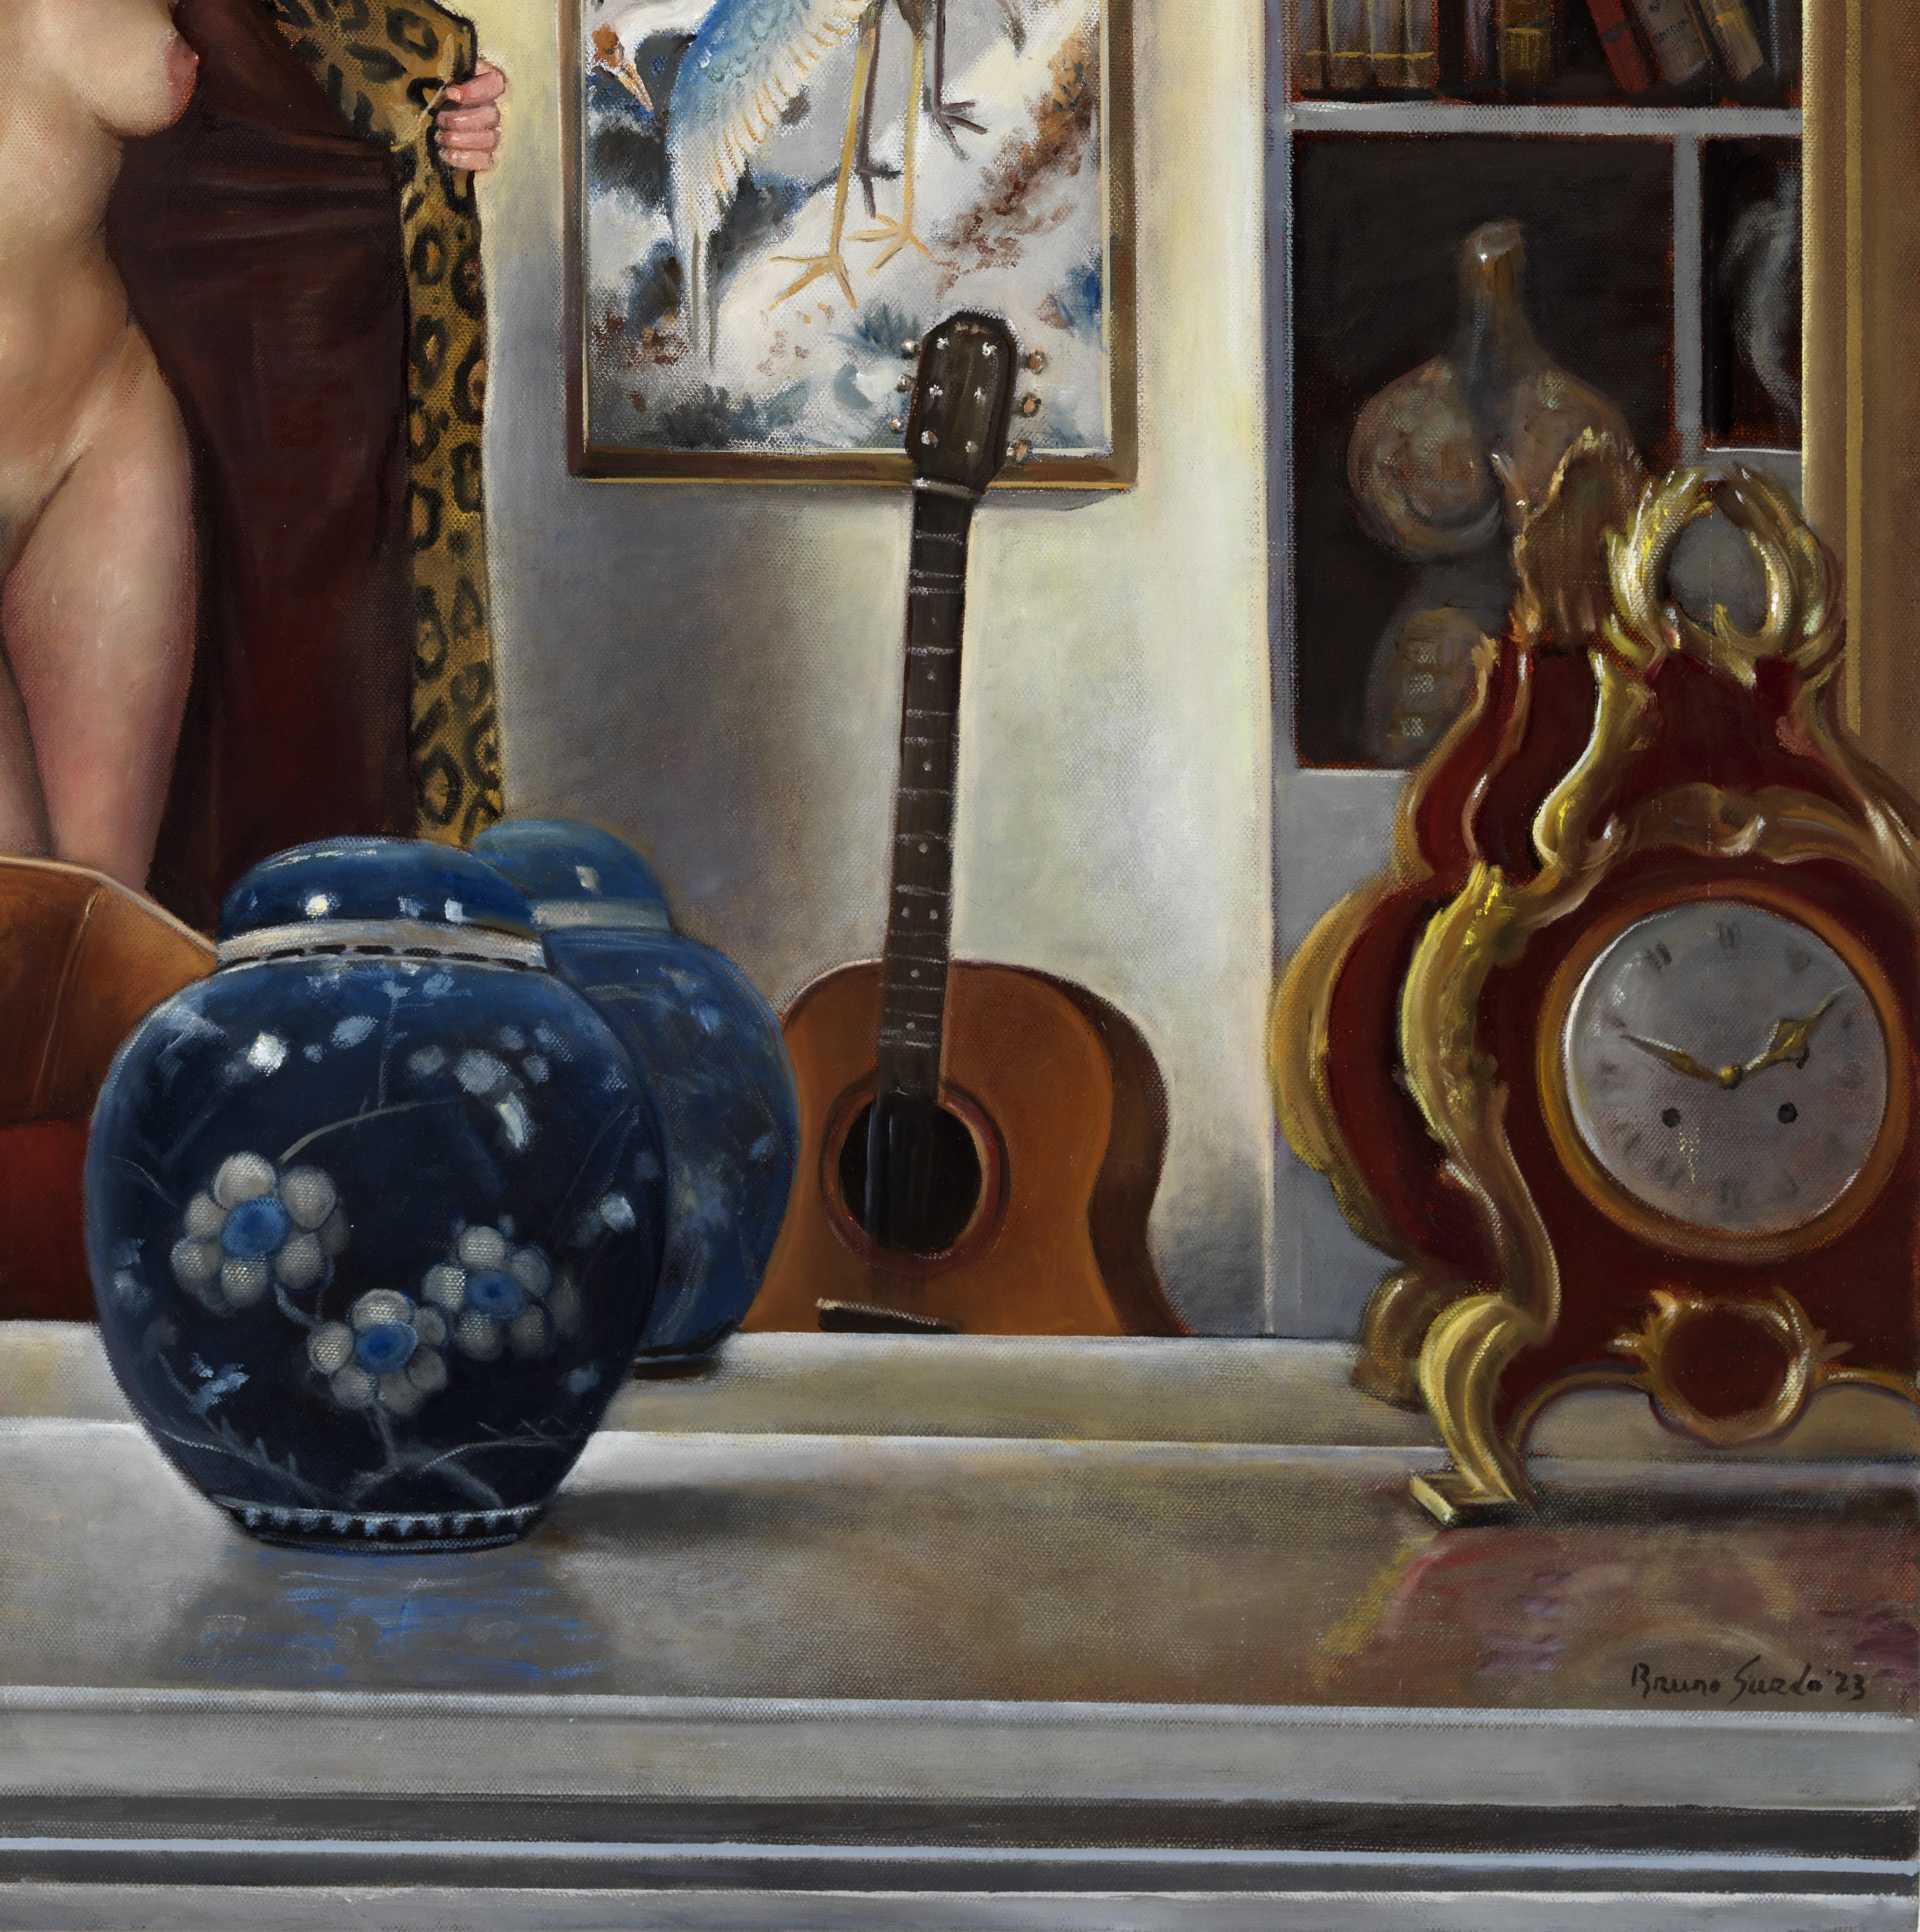 A woman is disrobing while entering what appears to be a library.  She gazes directly at the viewer suggesting we have interrupted this private moment. This intimate portrait is painted with a black trimmed edge therefore not requiring framing